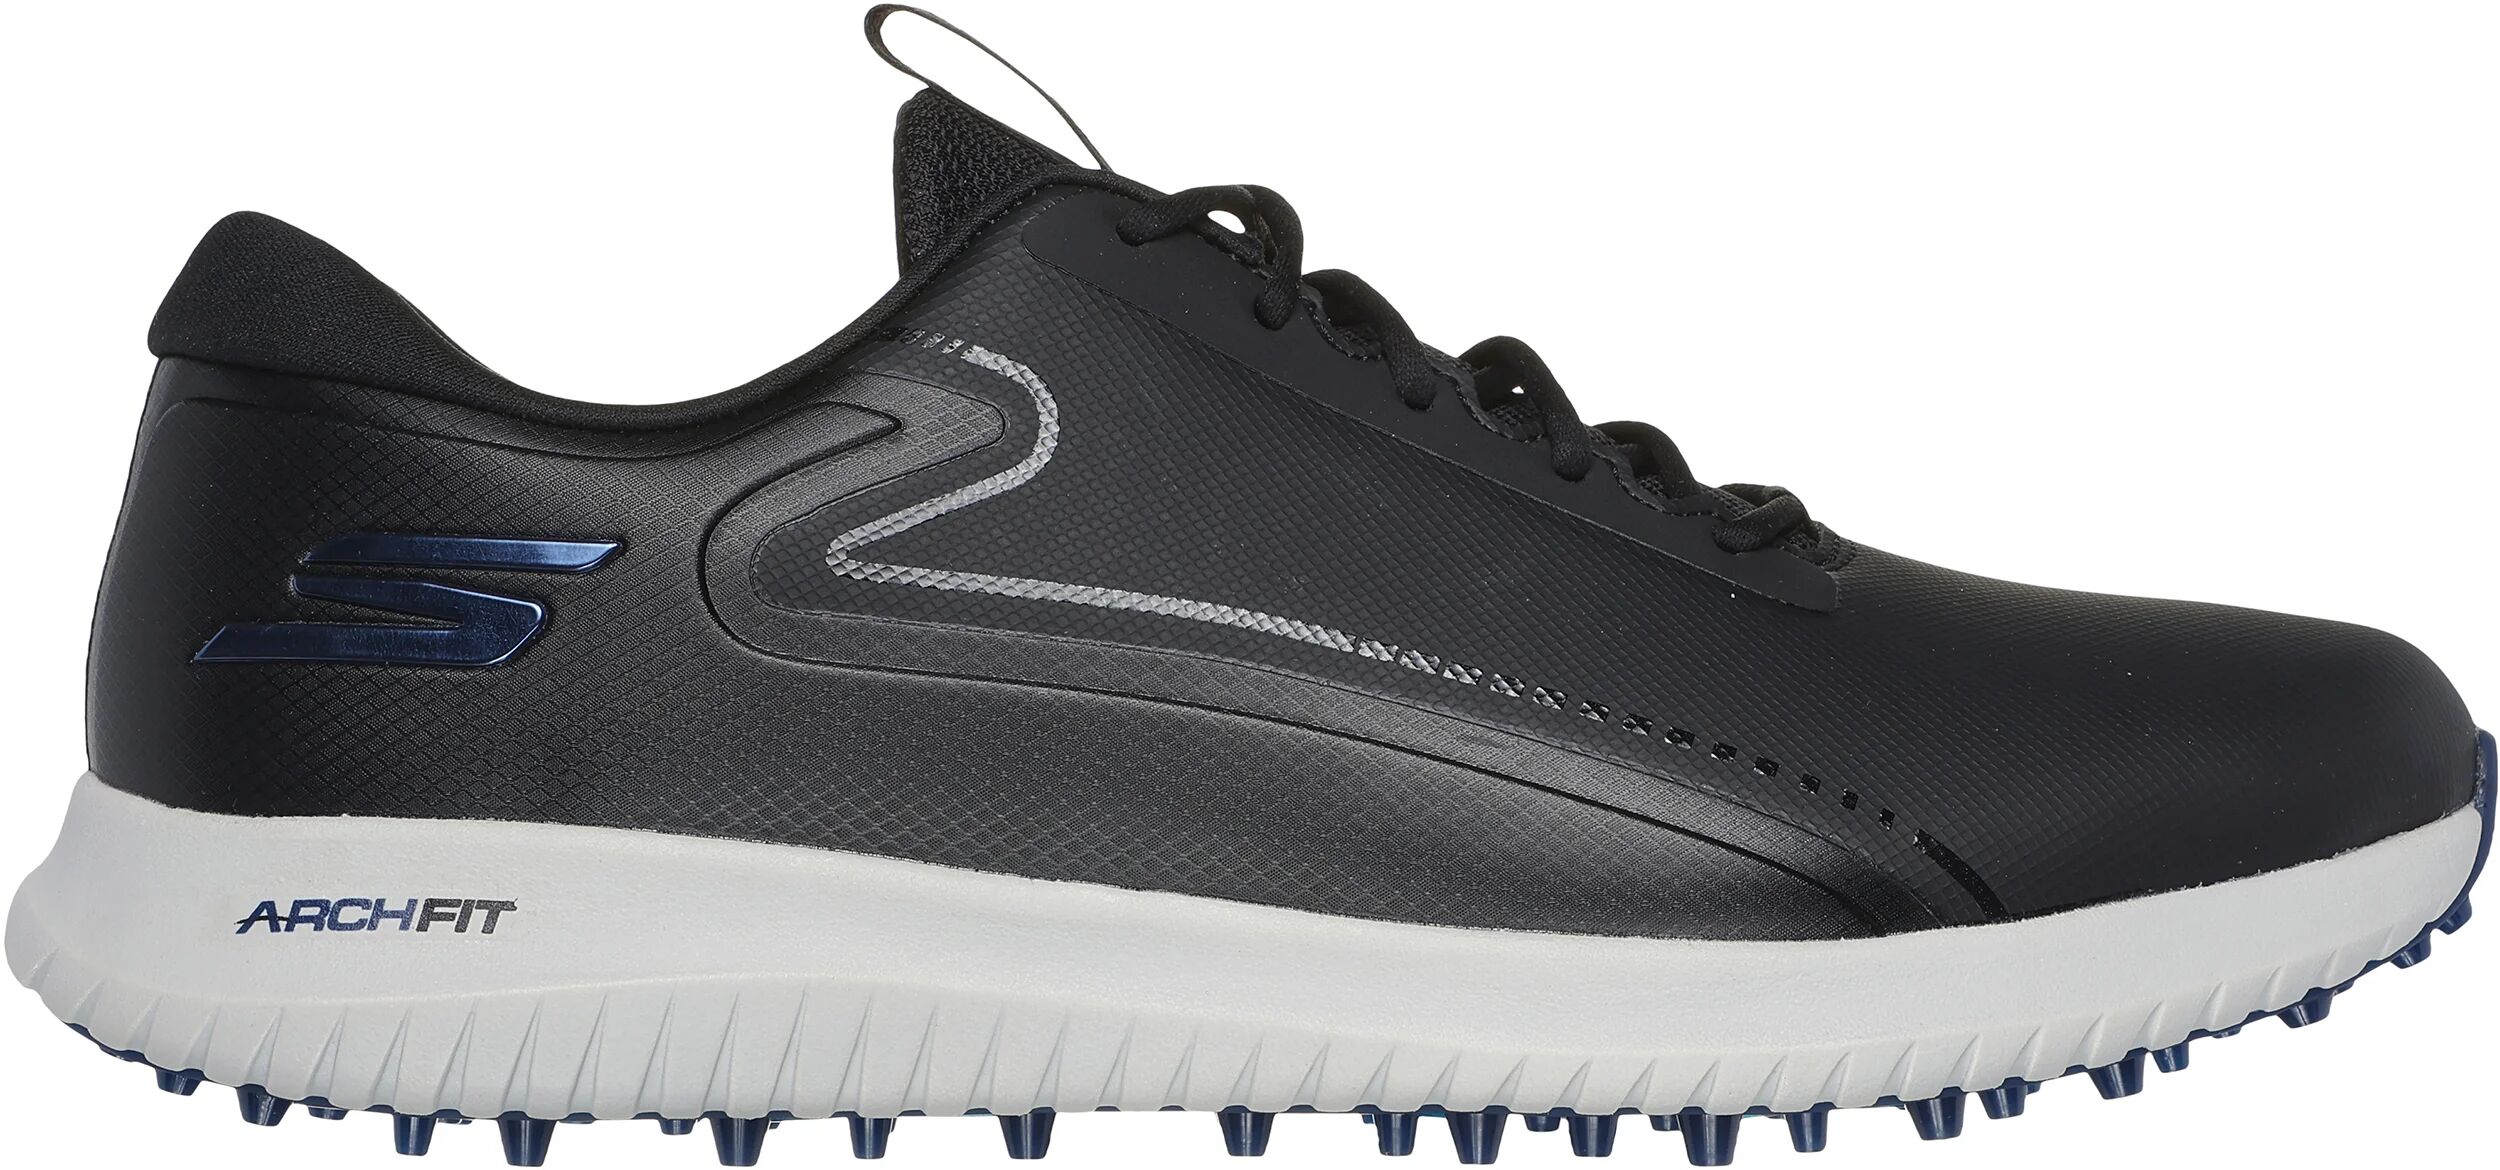 Skechers GO GOLF Max 3 Golf Shoes - Black/Gray - 8.5 - WIDE